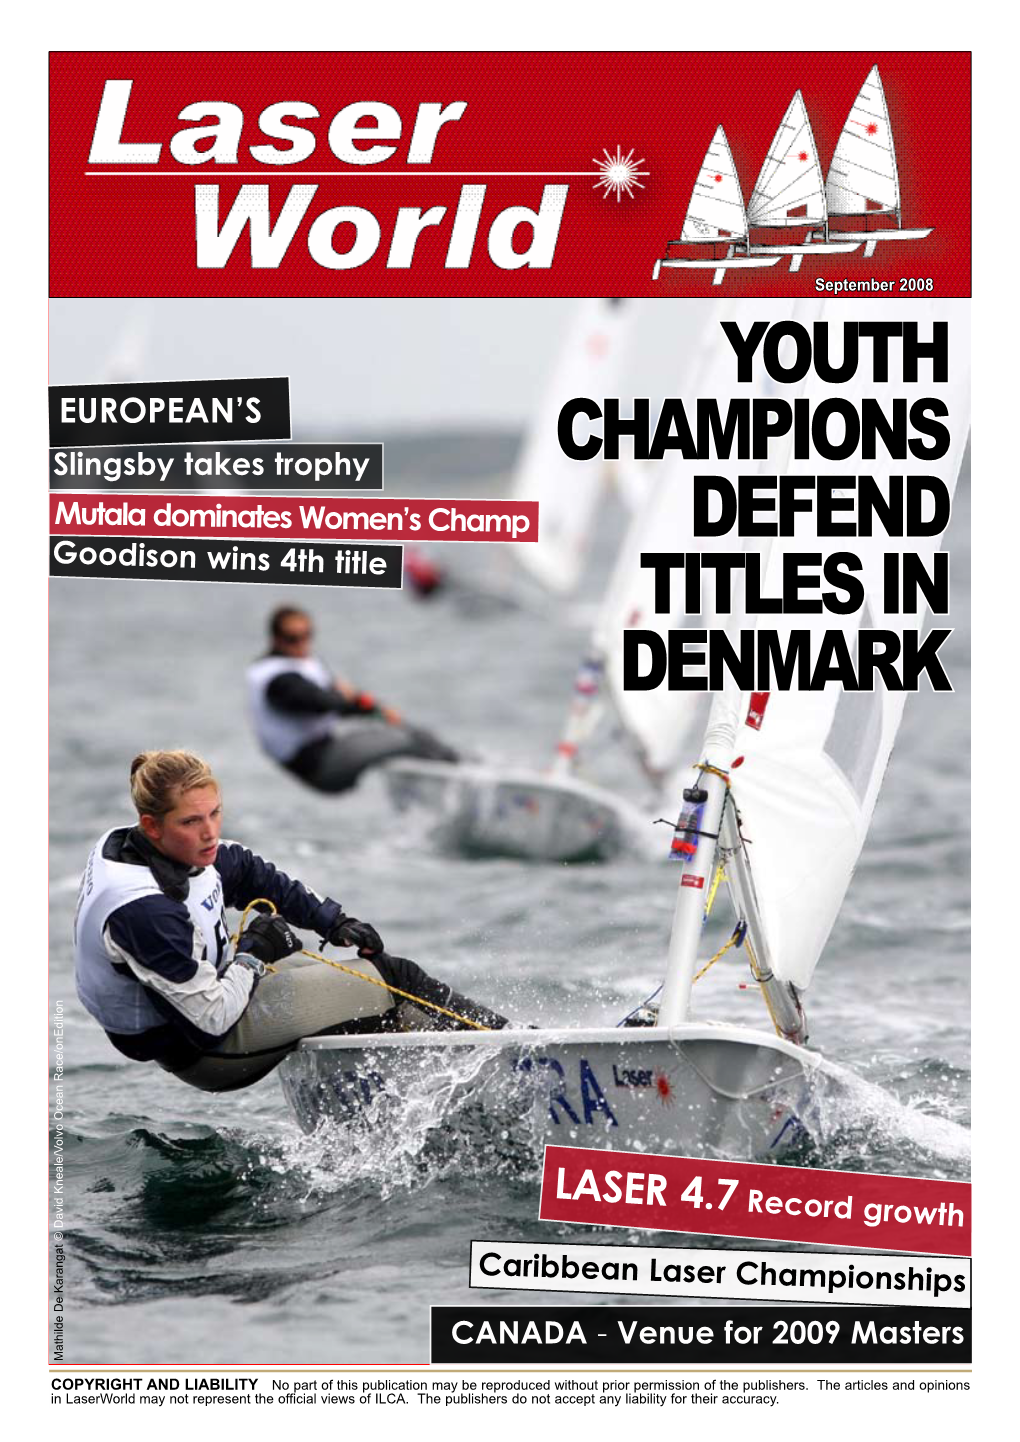 Youth Champions Defend Titles in Denmark